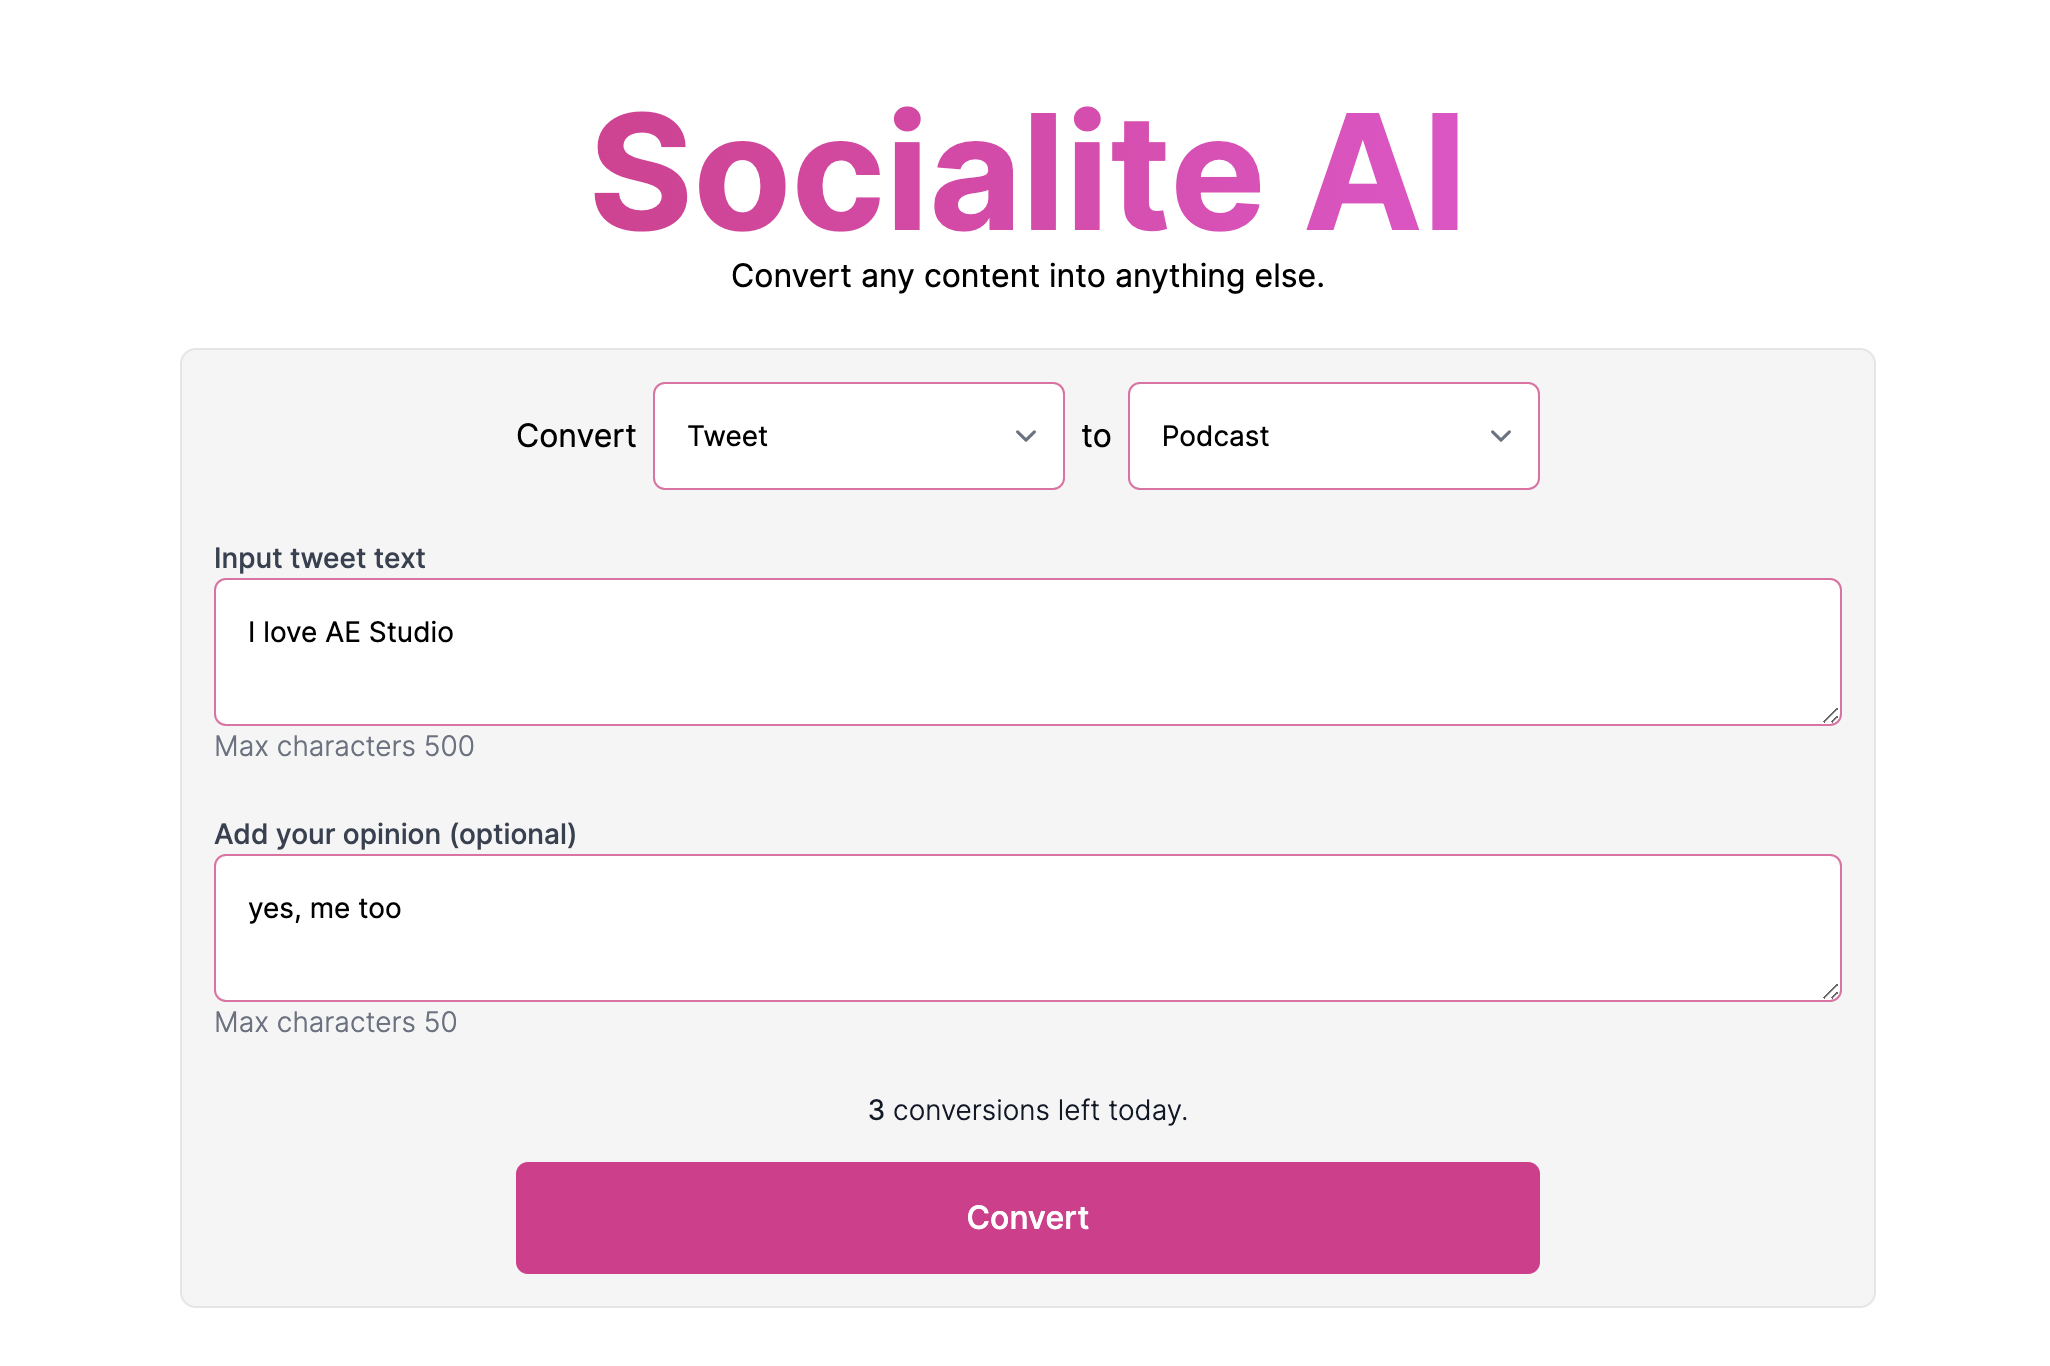 Socialite AI - A tool cto onvert any content into anything else